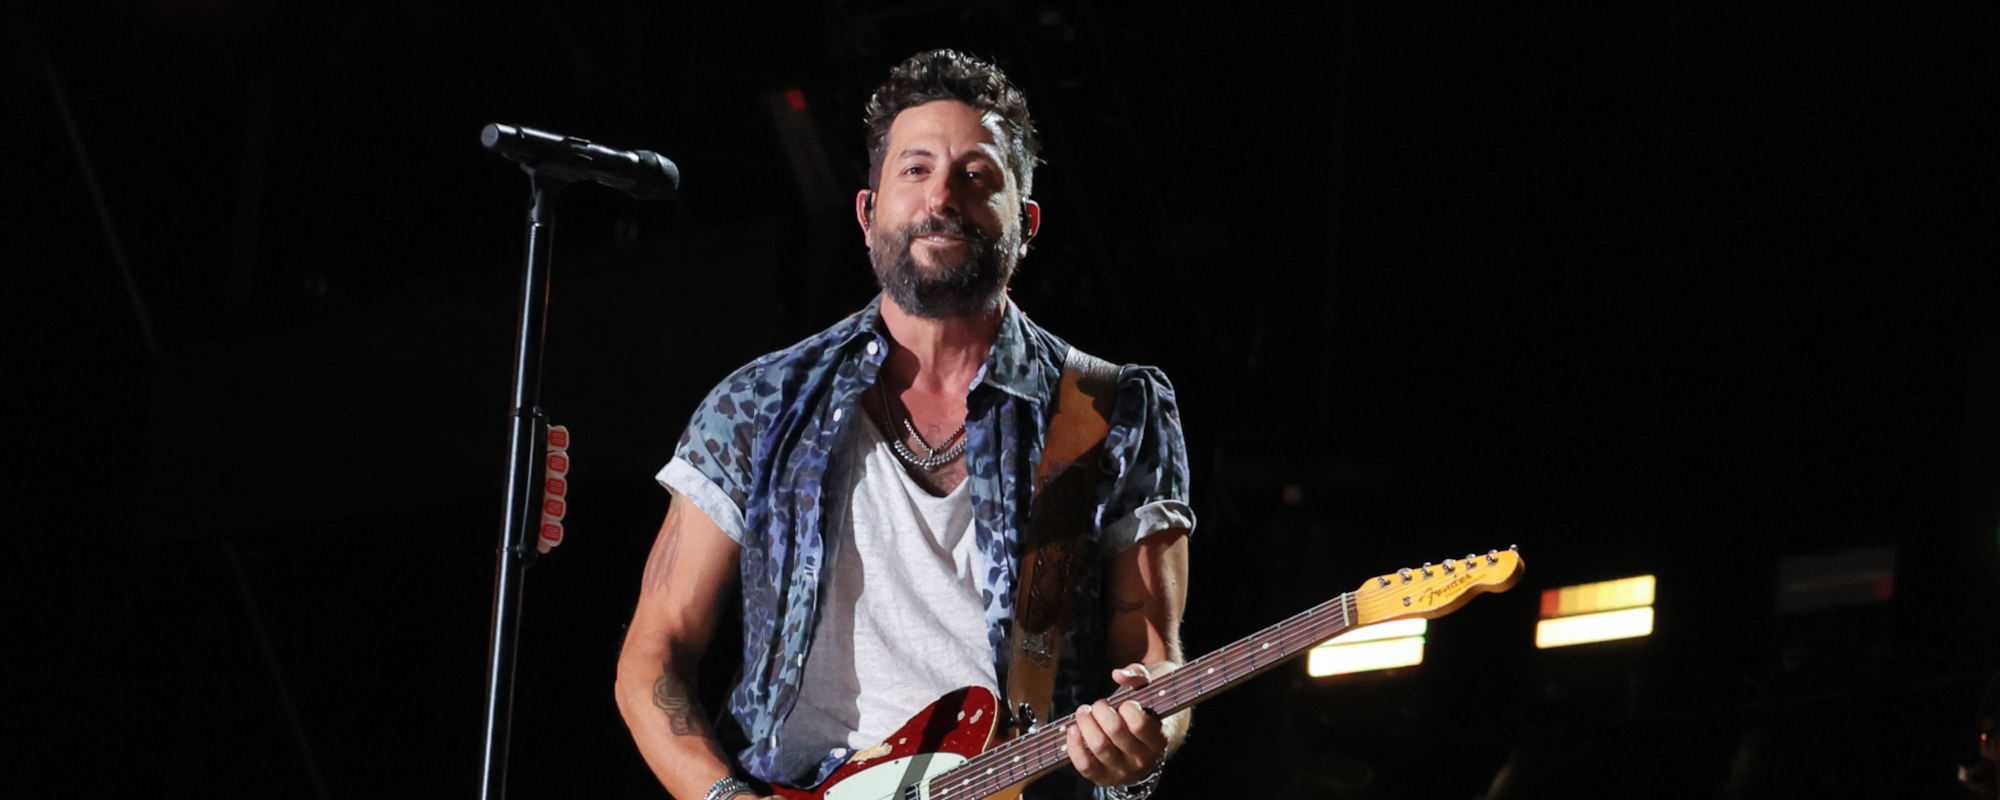 Old Dominion’s Matthew Ramsey Leans on Bandmates at 2023 ACM Awards